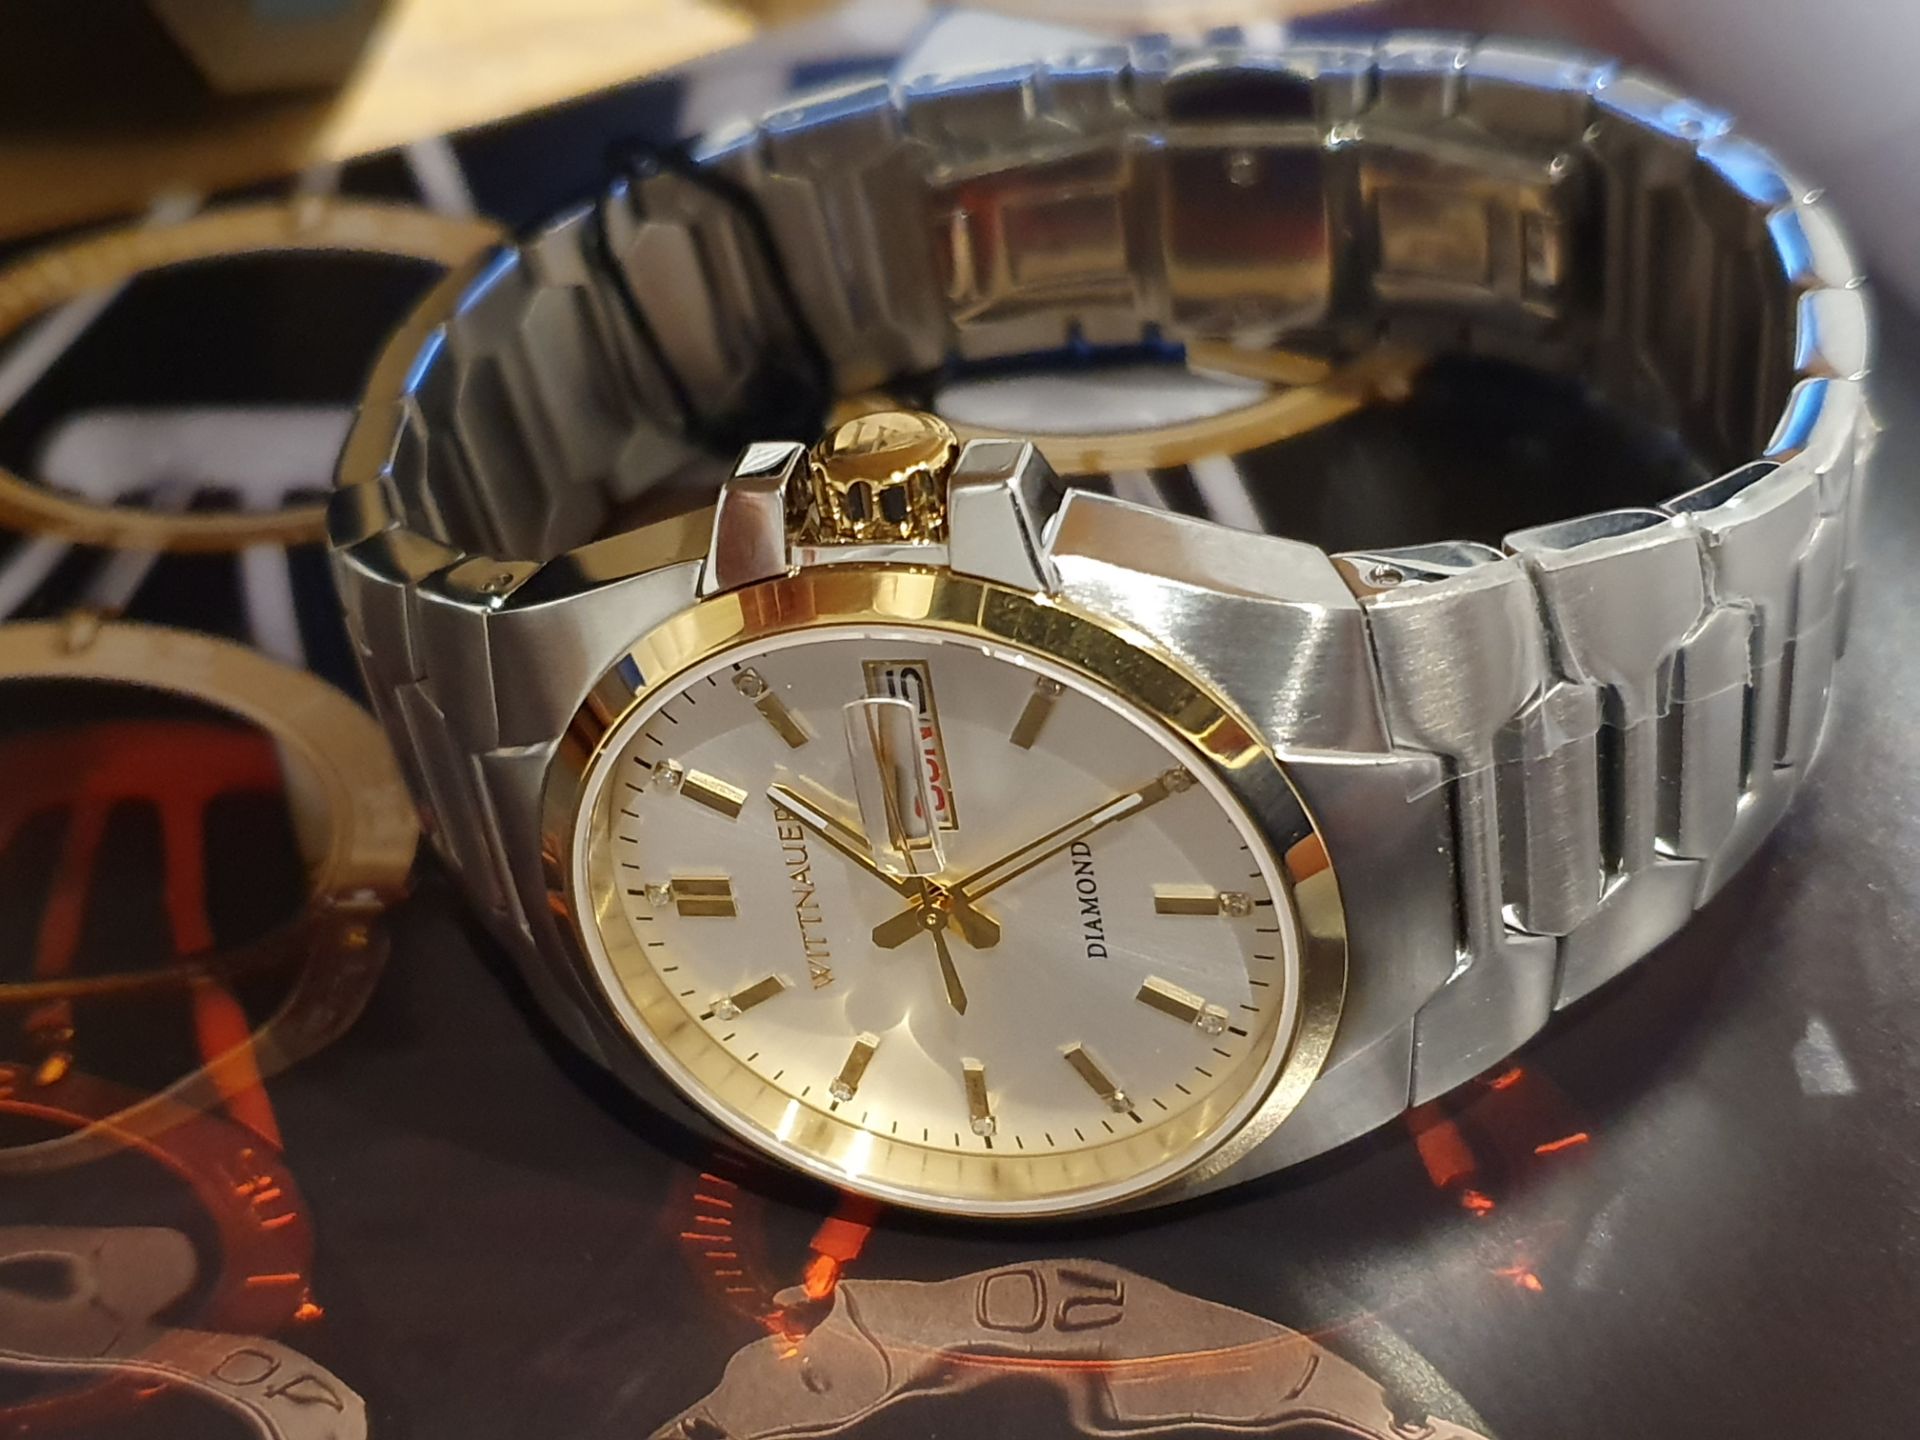 Wittnauer classic watch new - Image 2 of 4